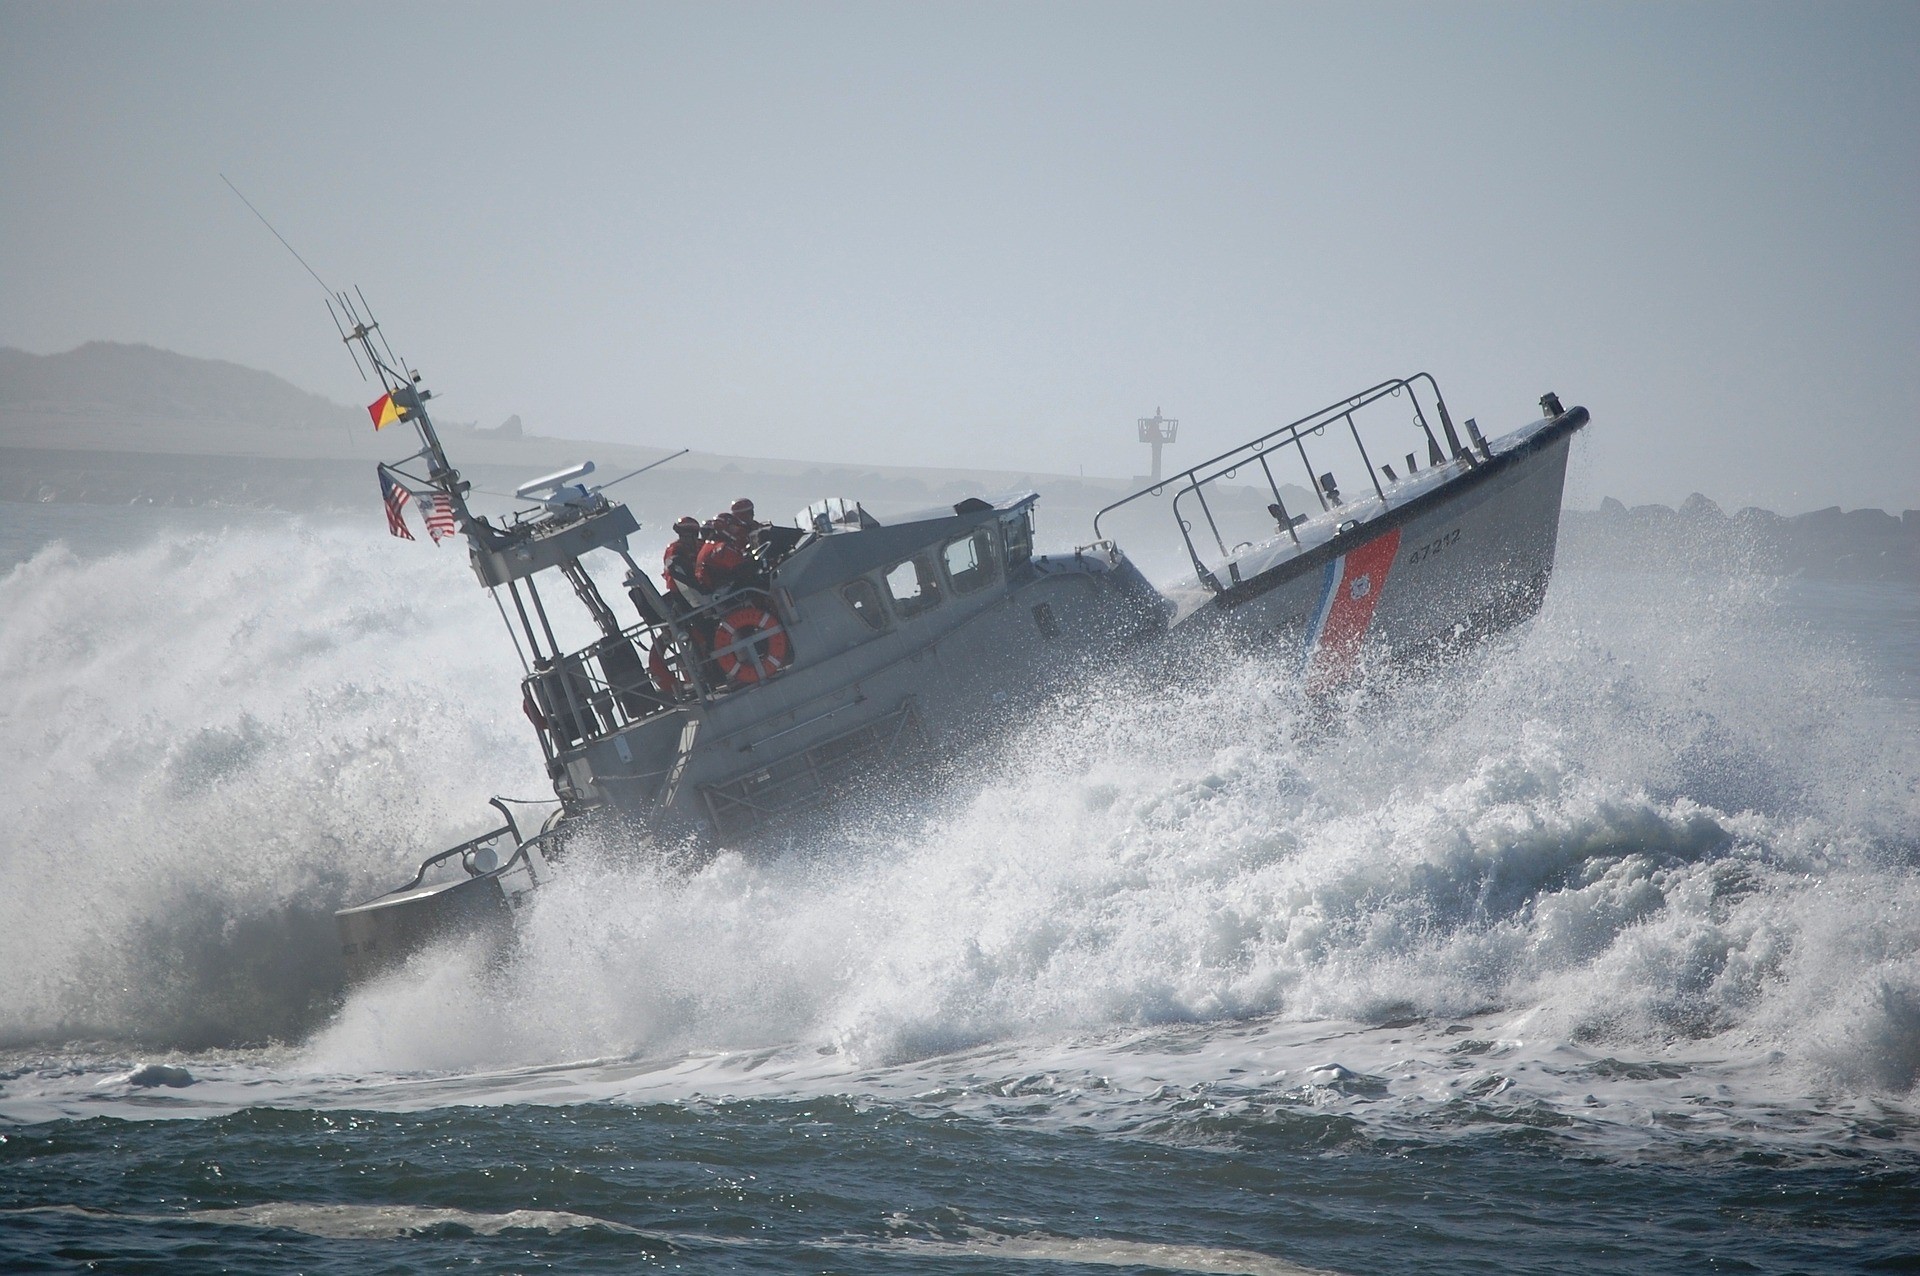 Lifeboat cresting a wave.